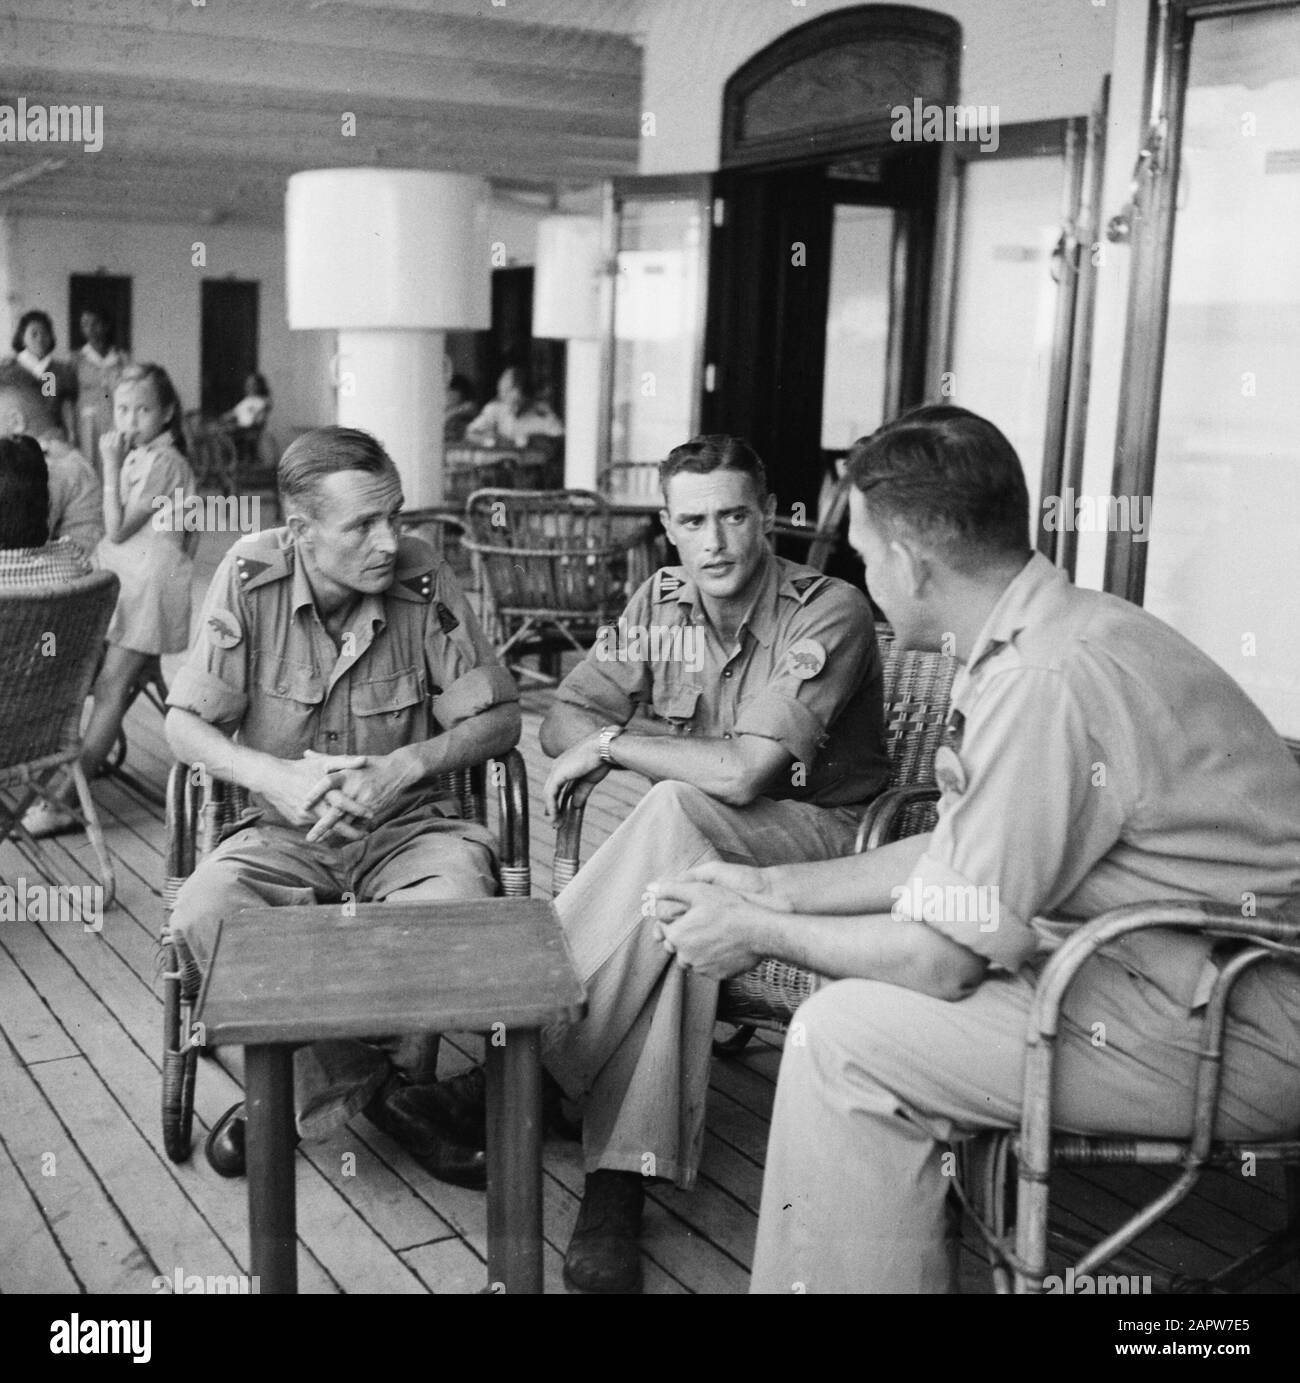 Departure first parts war volunteers of the Royal Army and demobilized KNIL per SS Johan van Oldenbarnevelt  KNIL officers and non-officers of Gadjah Merah in conversation Date: 15 January 1948 Location: Batavia, Indonesia, Jakarta, Dutch East Indies, Tandjong Priok Stock Photo